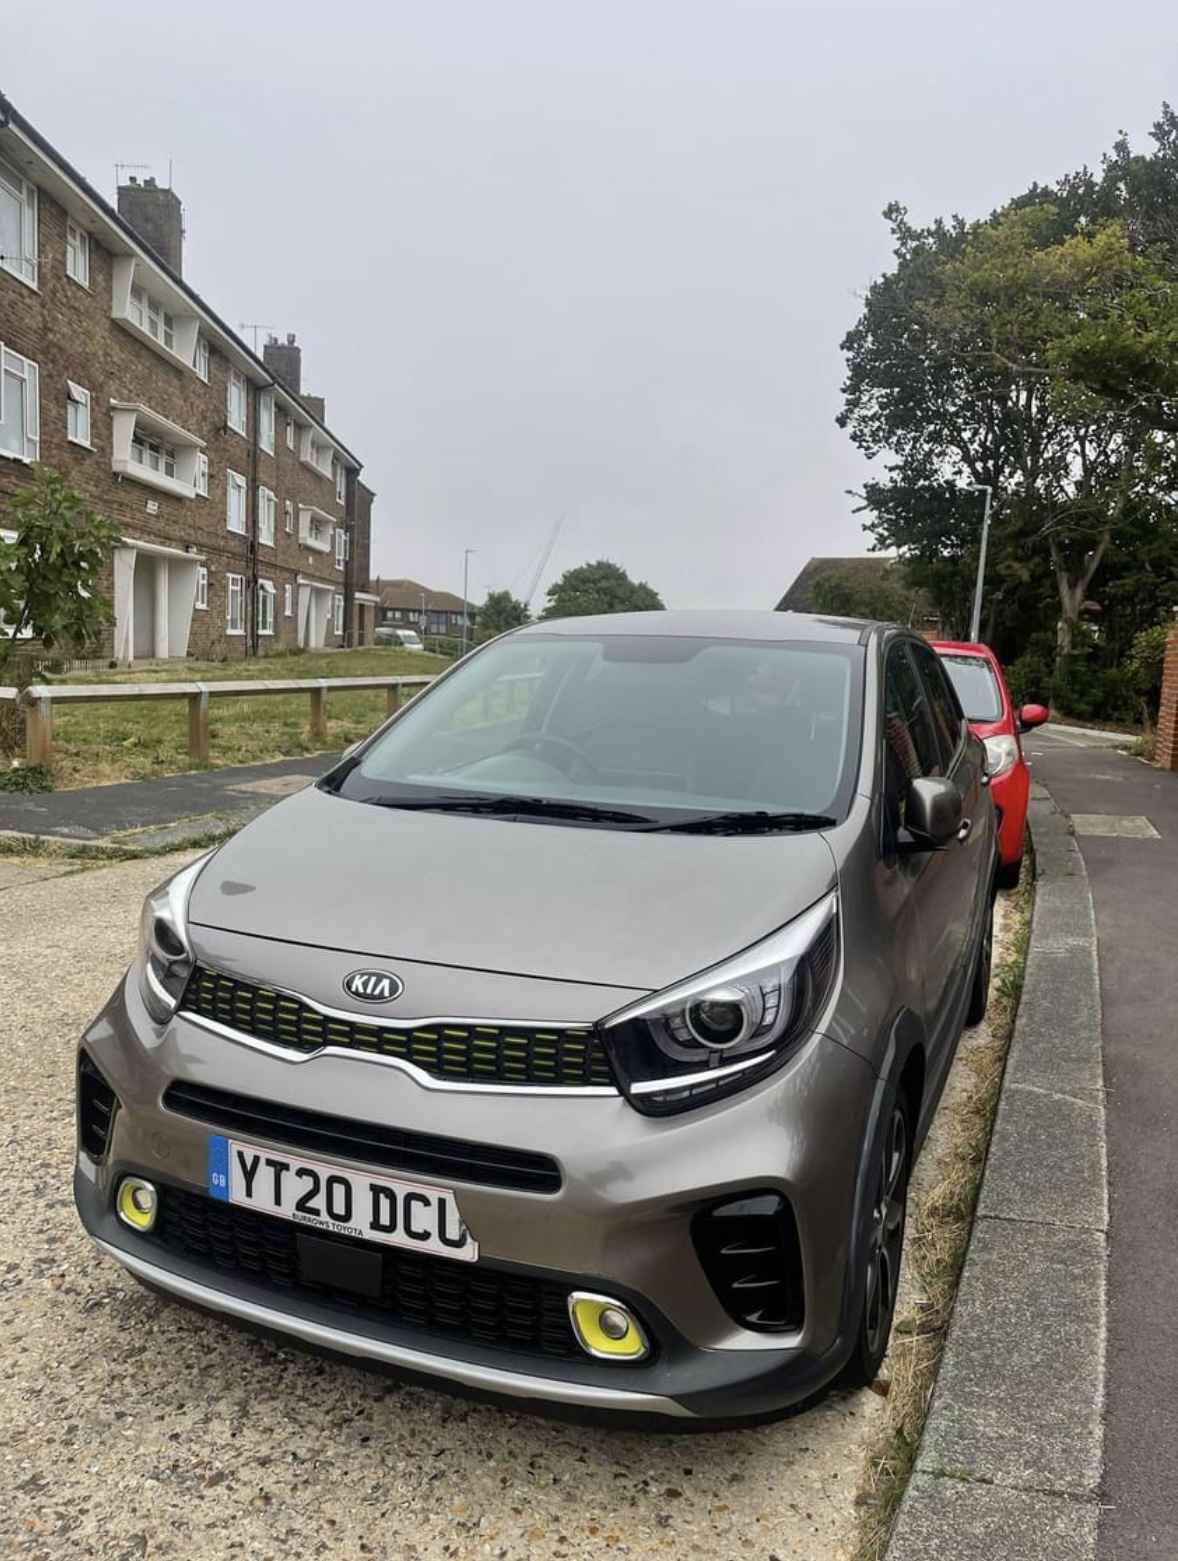 Photograph of YT20 DCU - a Grey Kia Picanto parked in Hollingdean by a non-resident and stored here whilst a dodgy car dealer attempts to sell it. The second of five photographs supplied by the residents of Hollingdean.